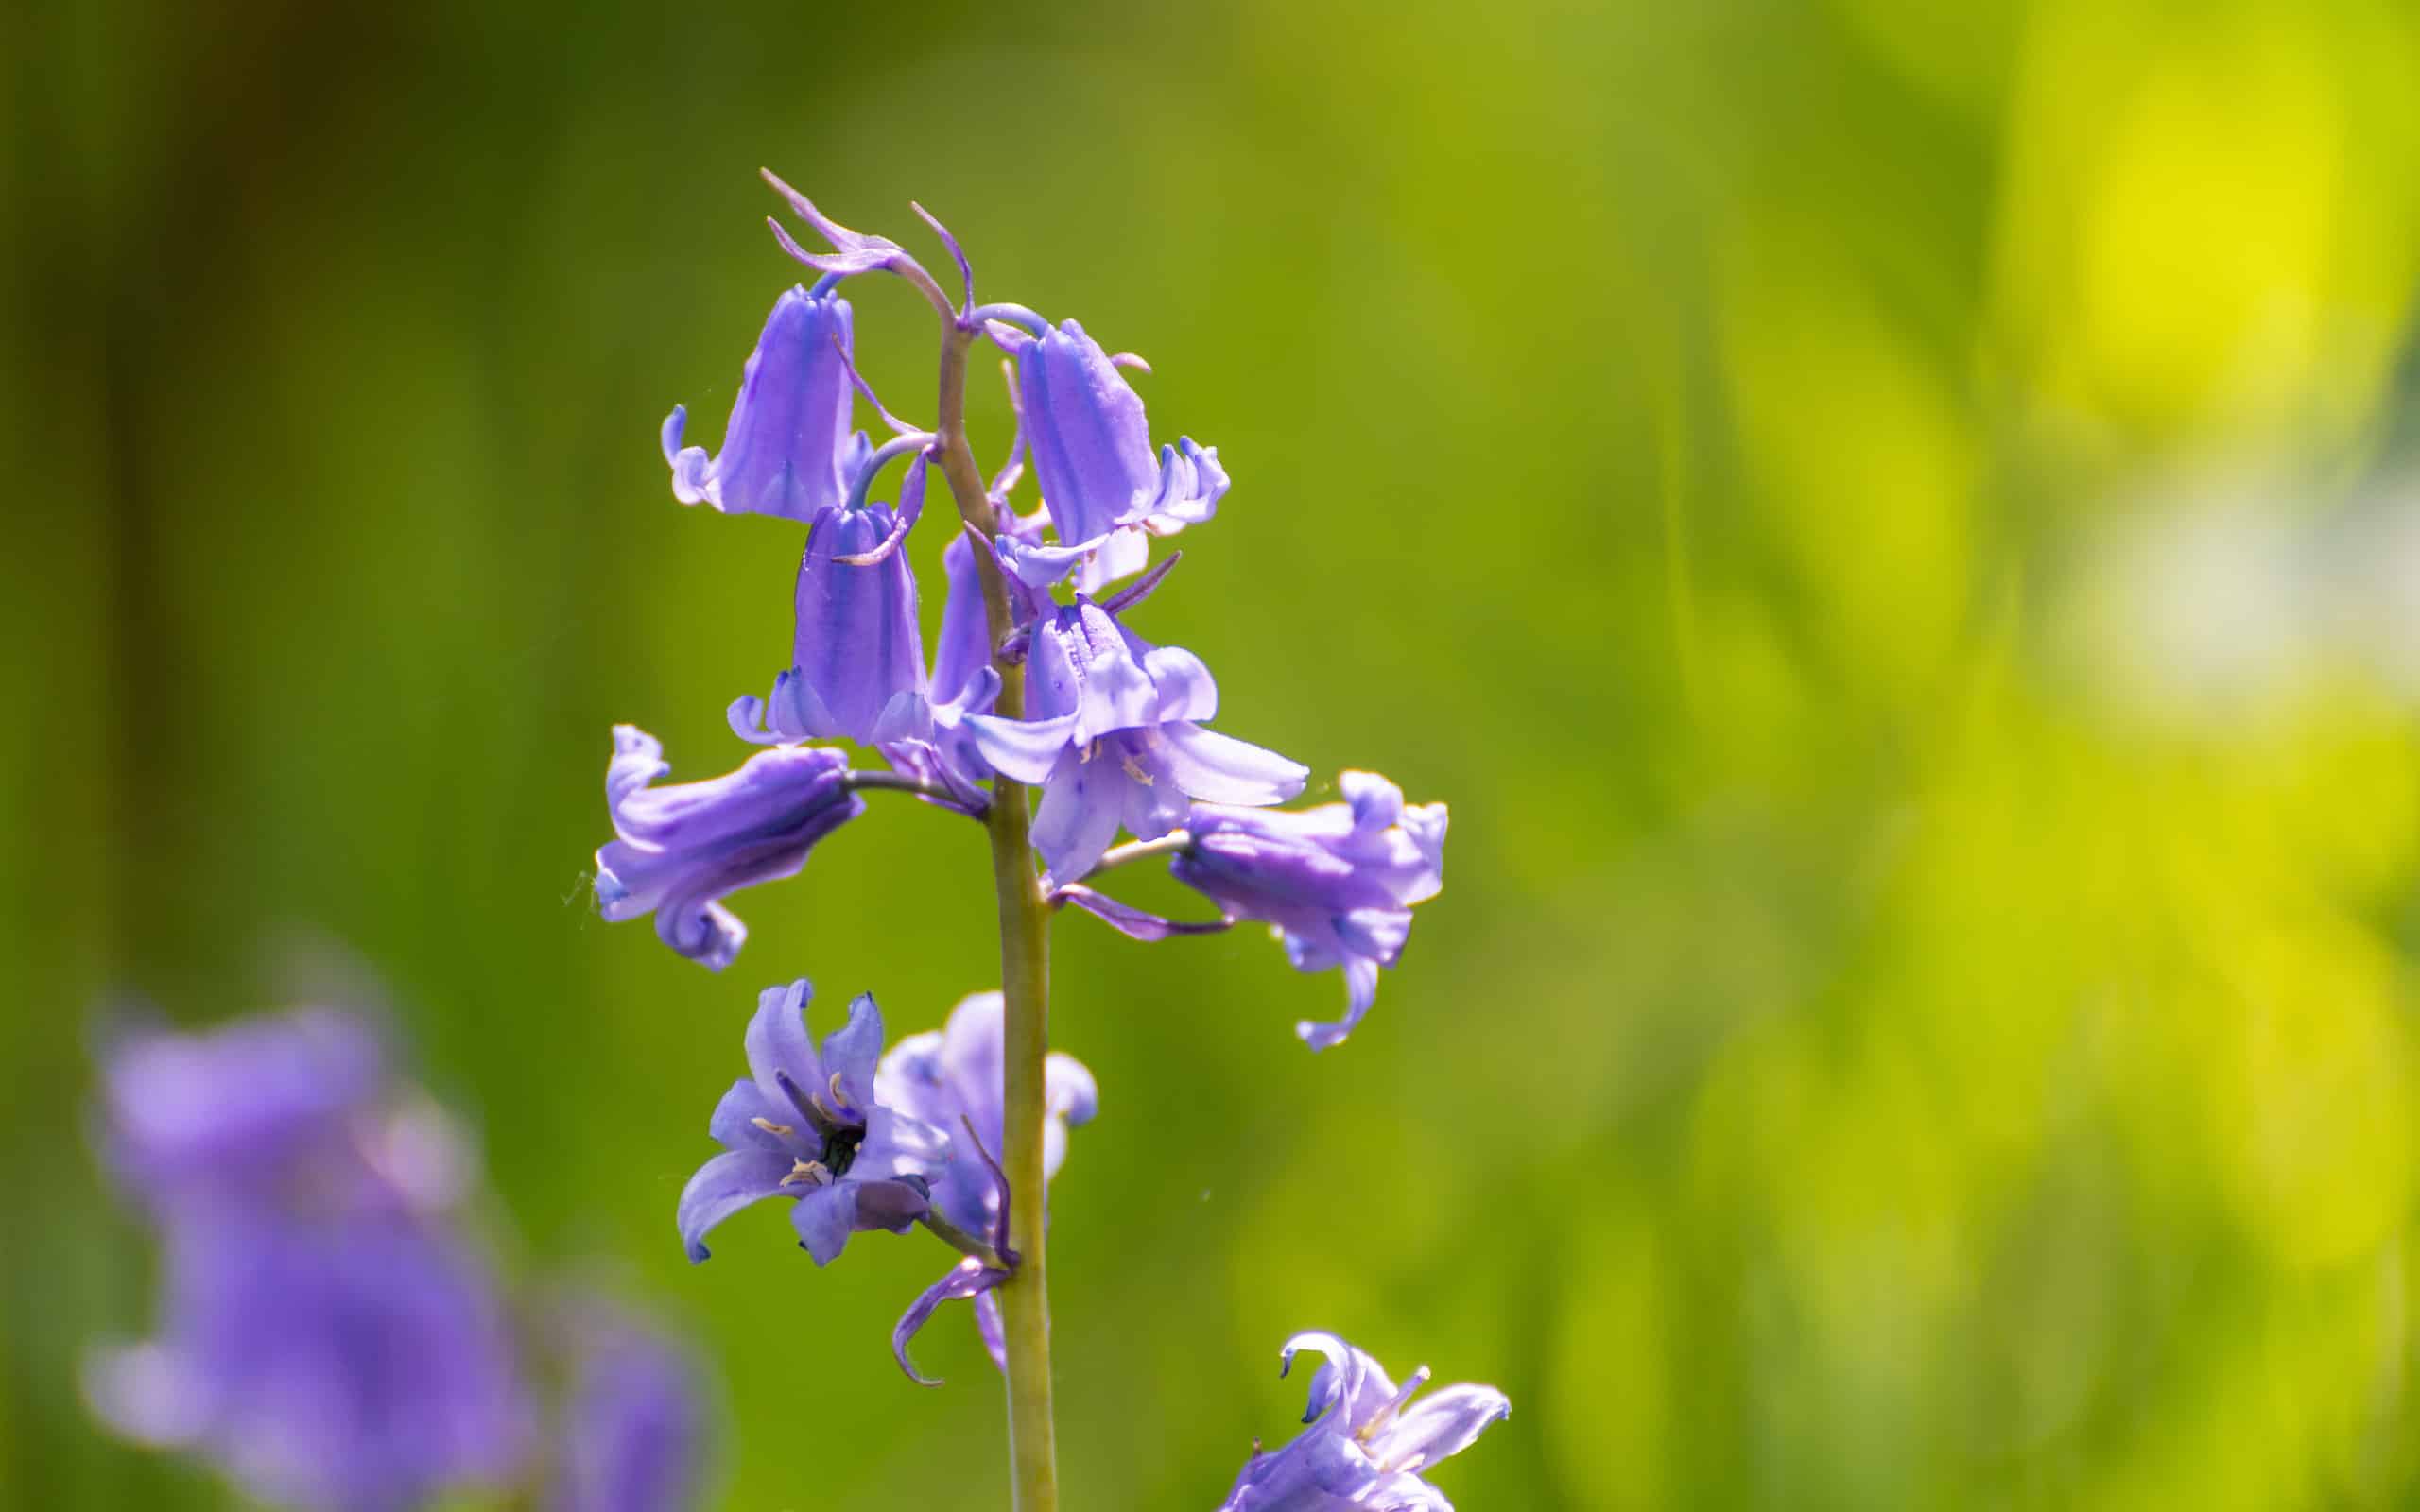 Sunlit Bluebells with a shallow depth of field